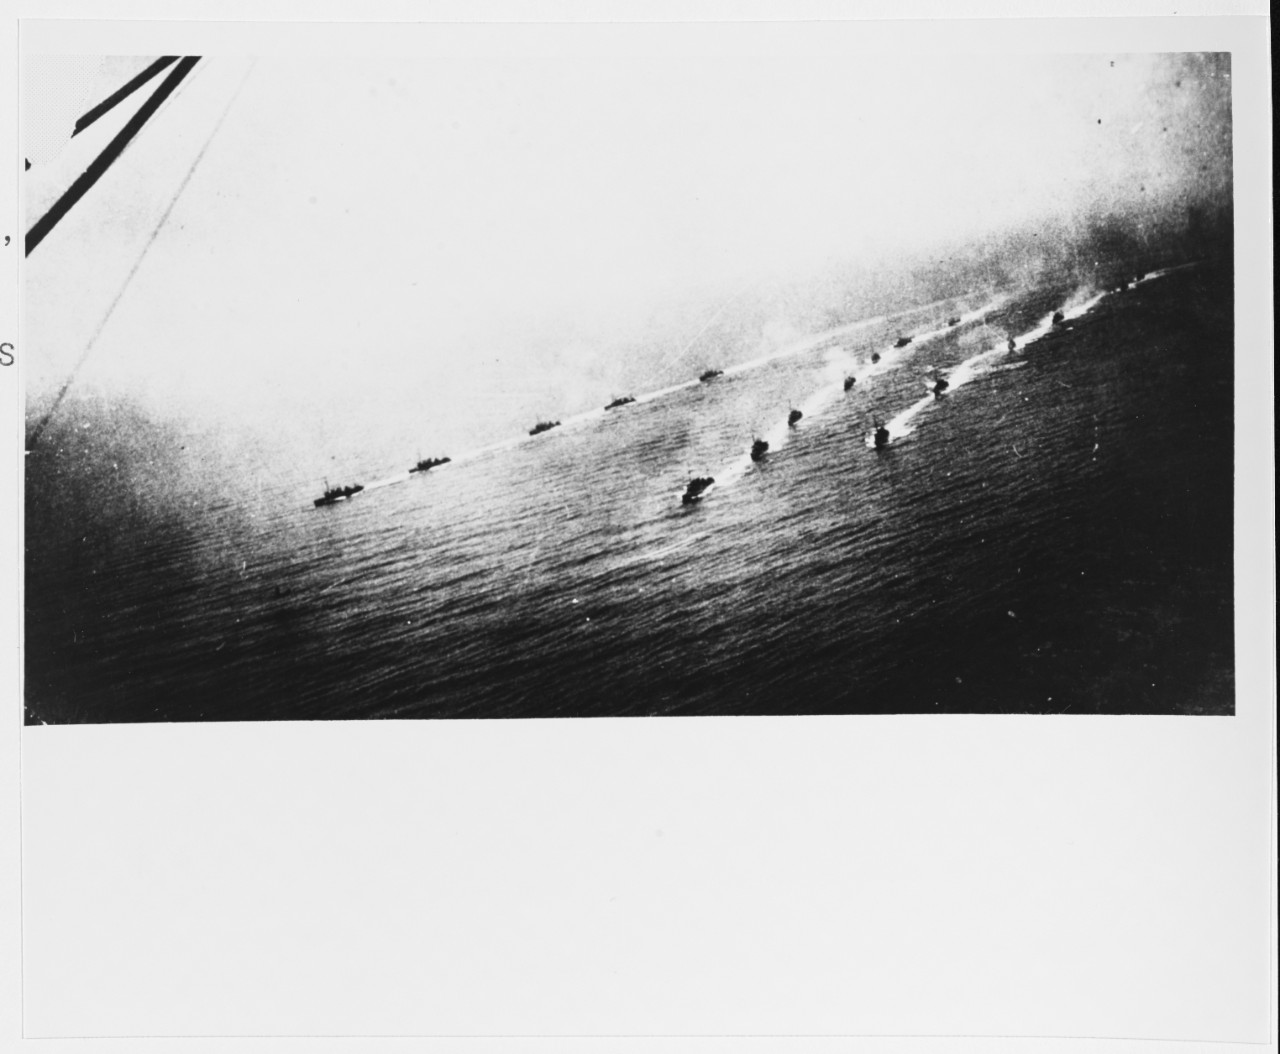 Pacific Fleet maneuvers, early 1920s.